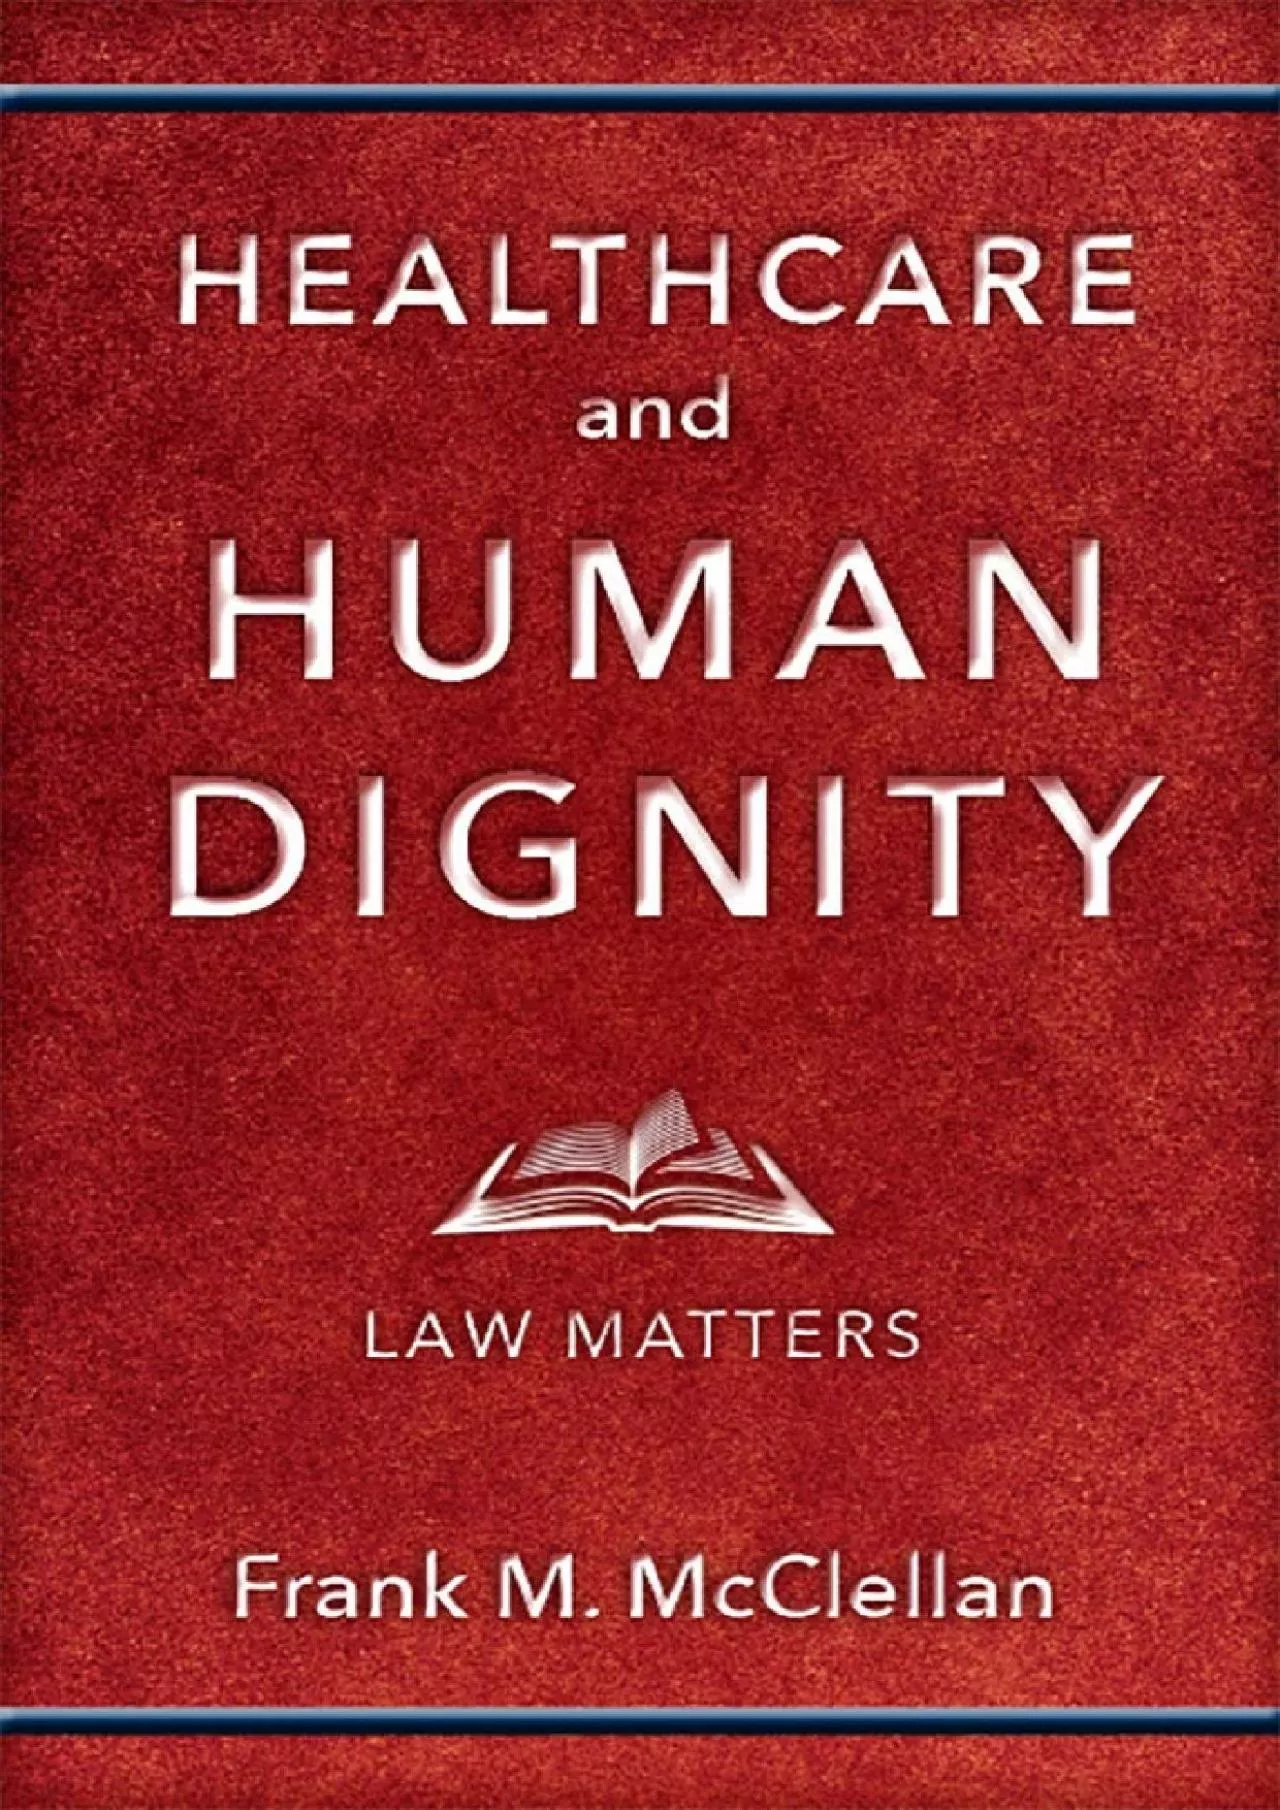 [BOOK]-Healthcare and Human Dignity: Law Matters (Critical Issues in Health and Medicine)